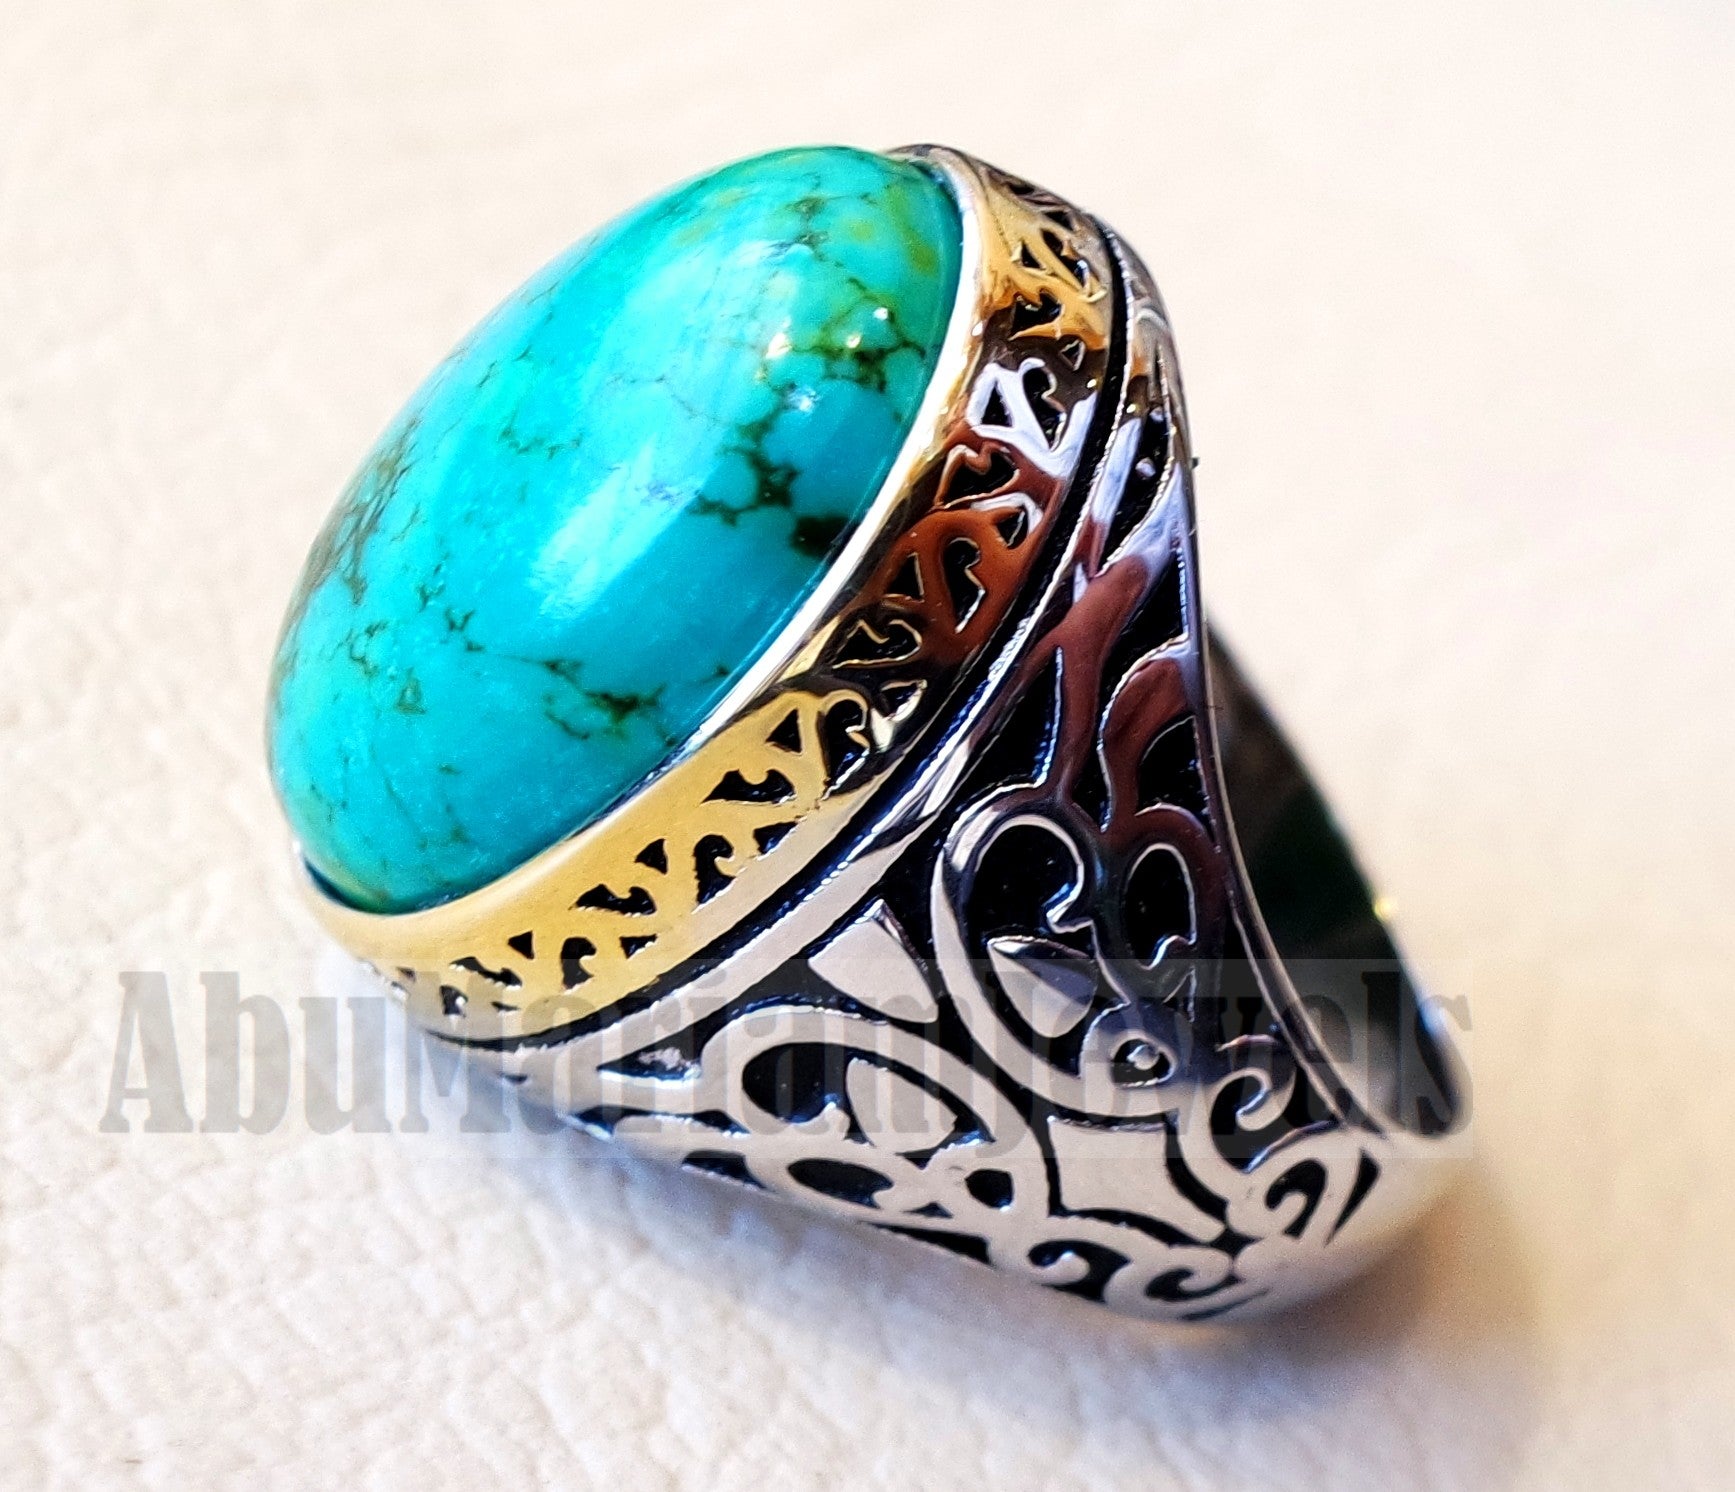 man ring nishapur tibet turquoise blue natural high quality stone sterling silver 925 and gold plated frame gem middle eastern style